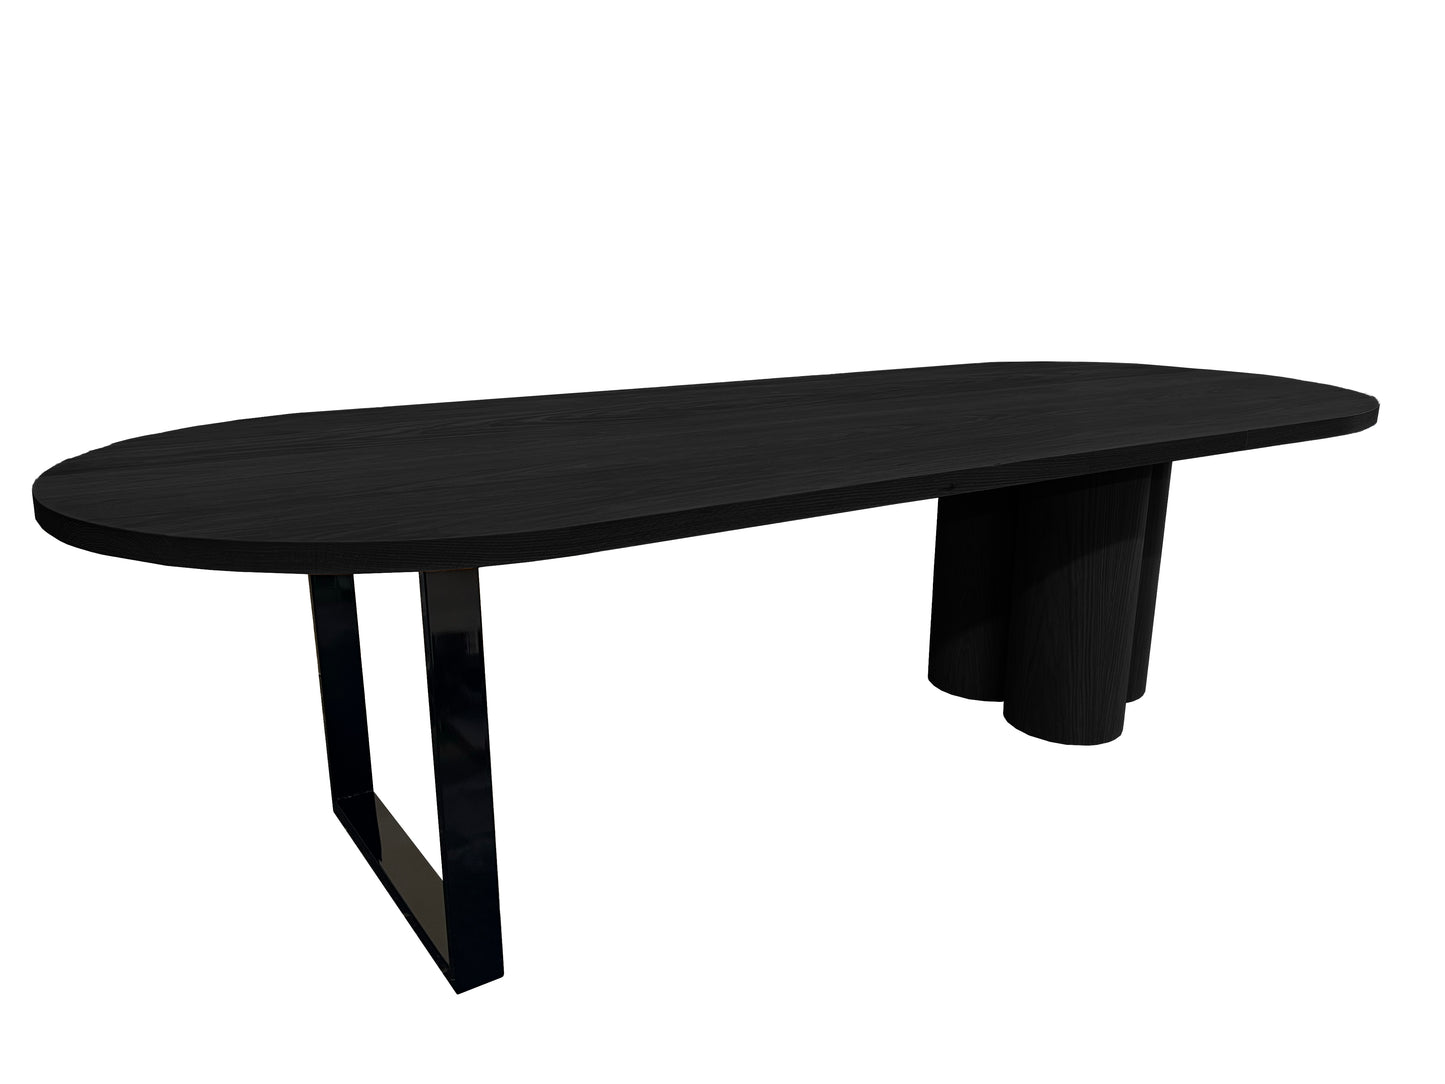 Ovail Black White Oak Conference Table